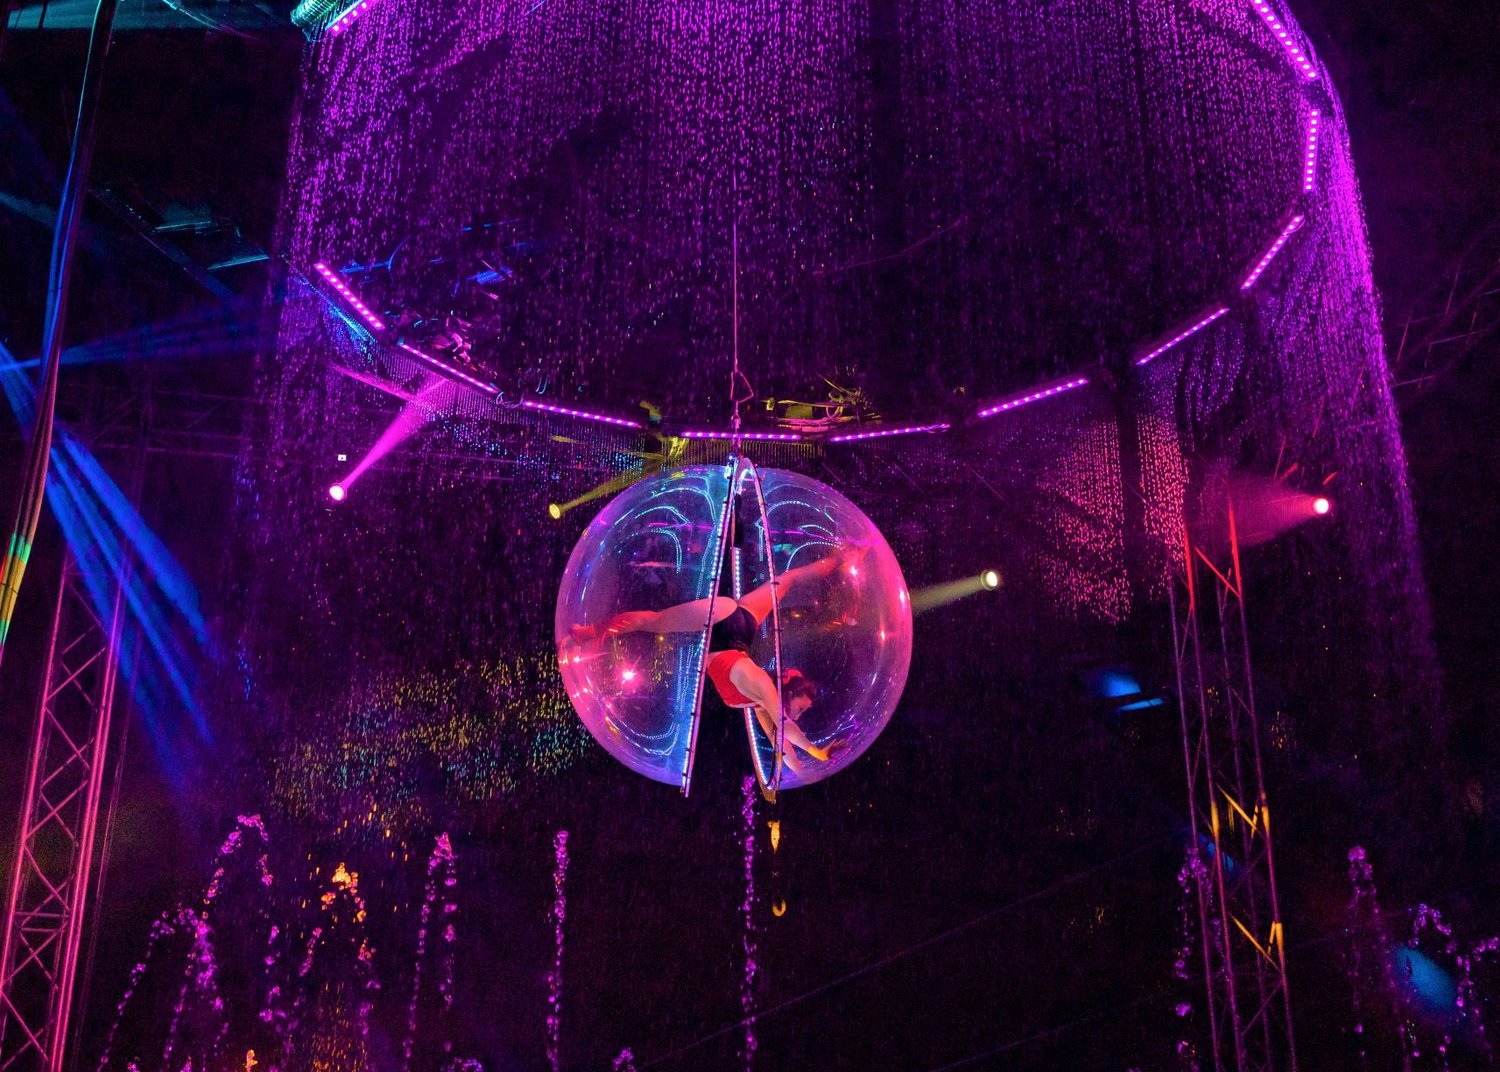 A contortion bubble is among the attractions at Cirque Italia.